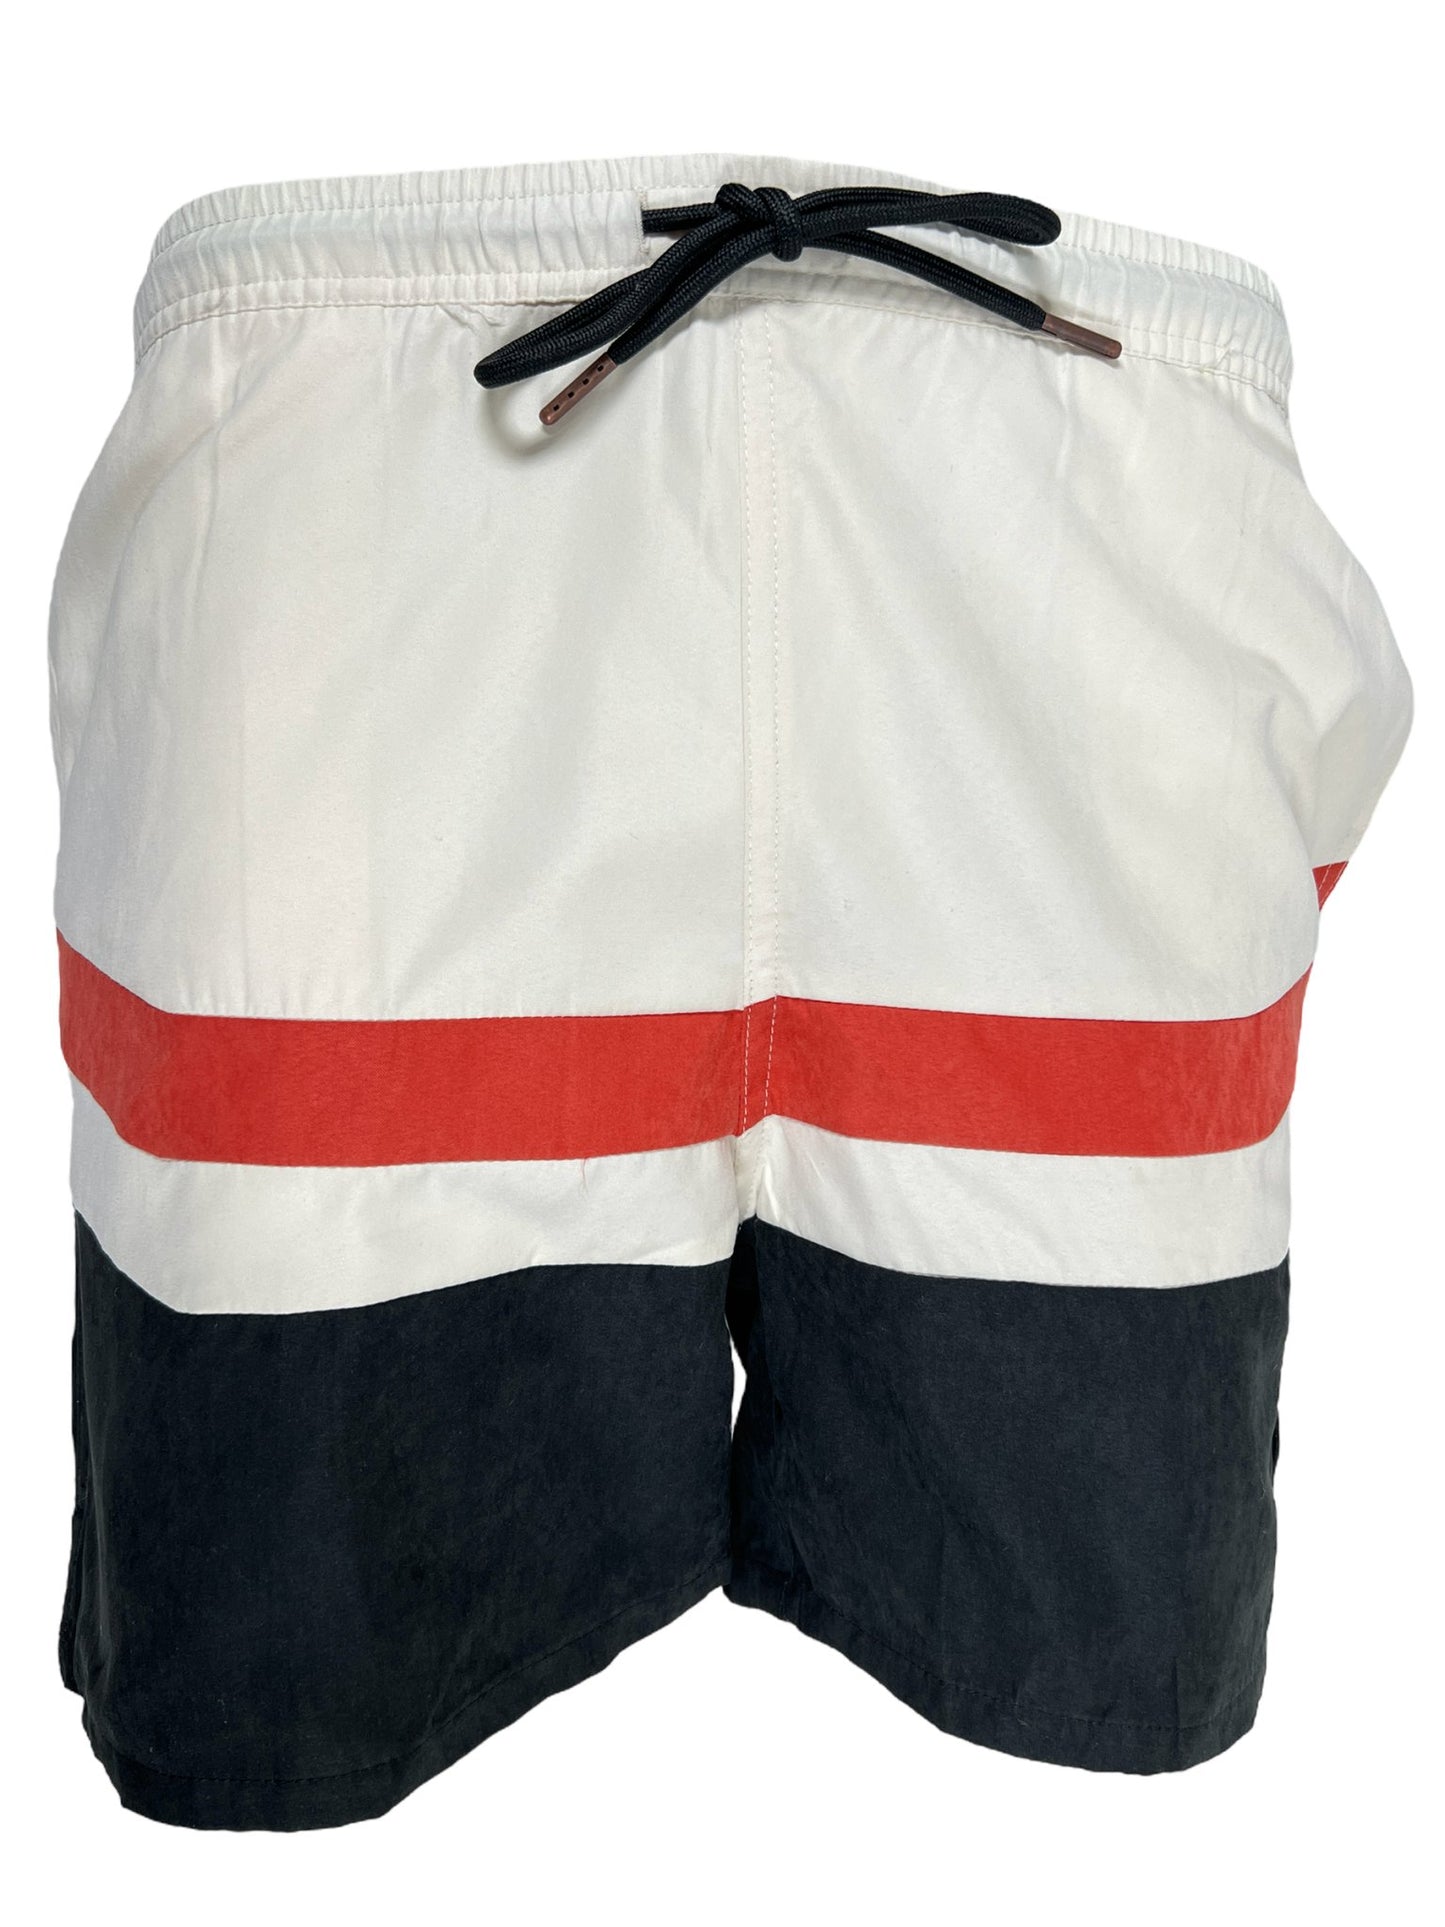 Swim trunks with a white upper, red horizontal stripe, and navy lower half, featuring a black drawstring and an HONOR THE GIFT ORIGINAL ART CHENILLE PATCH.